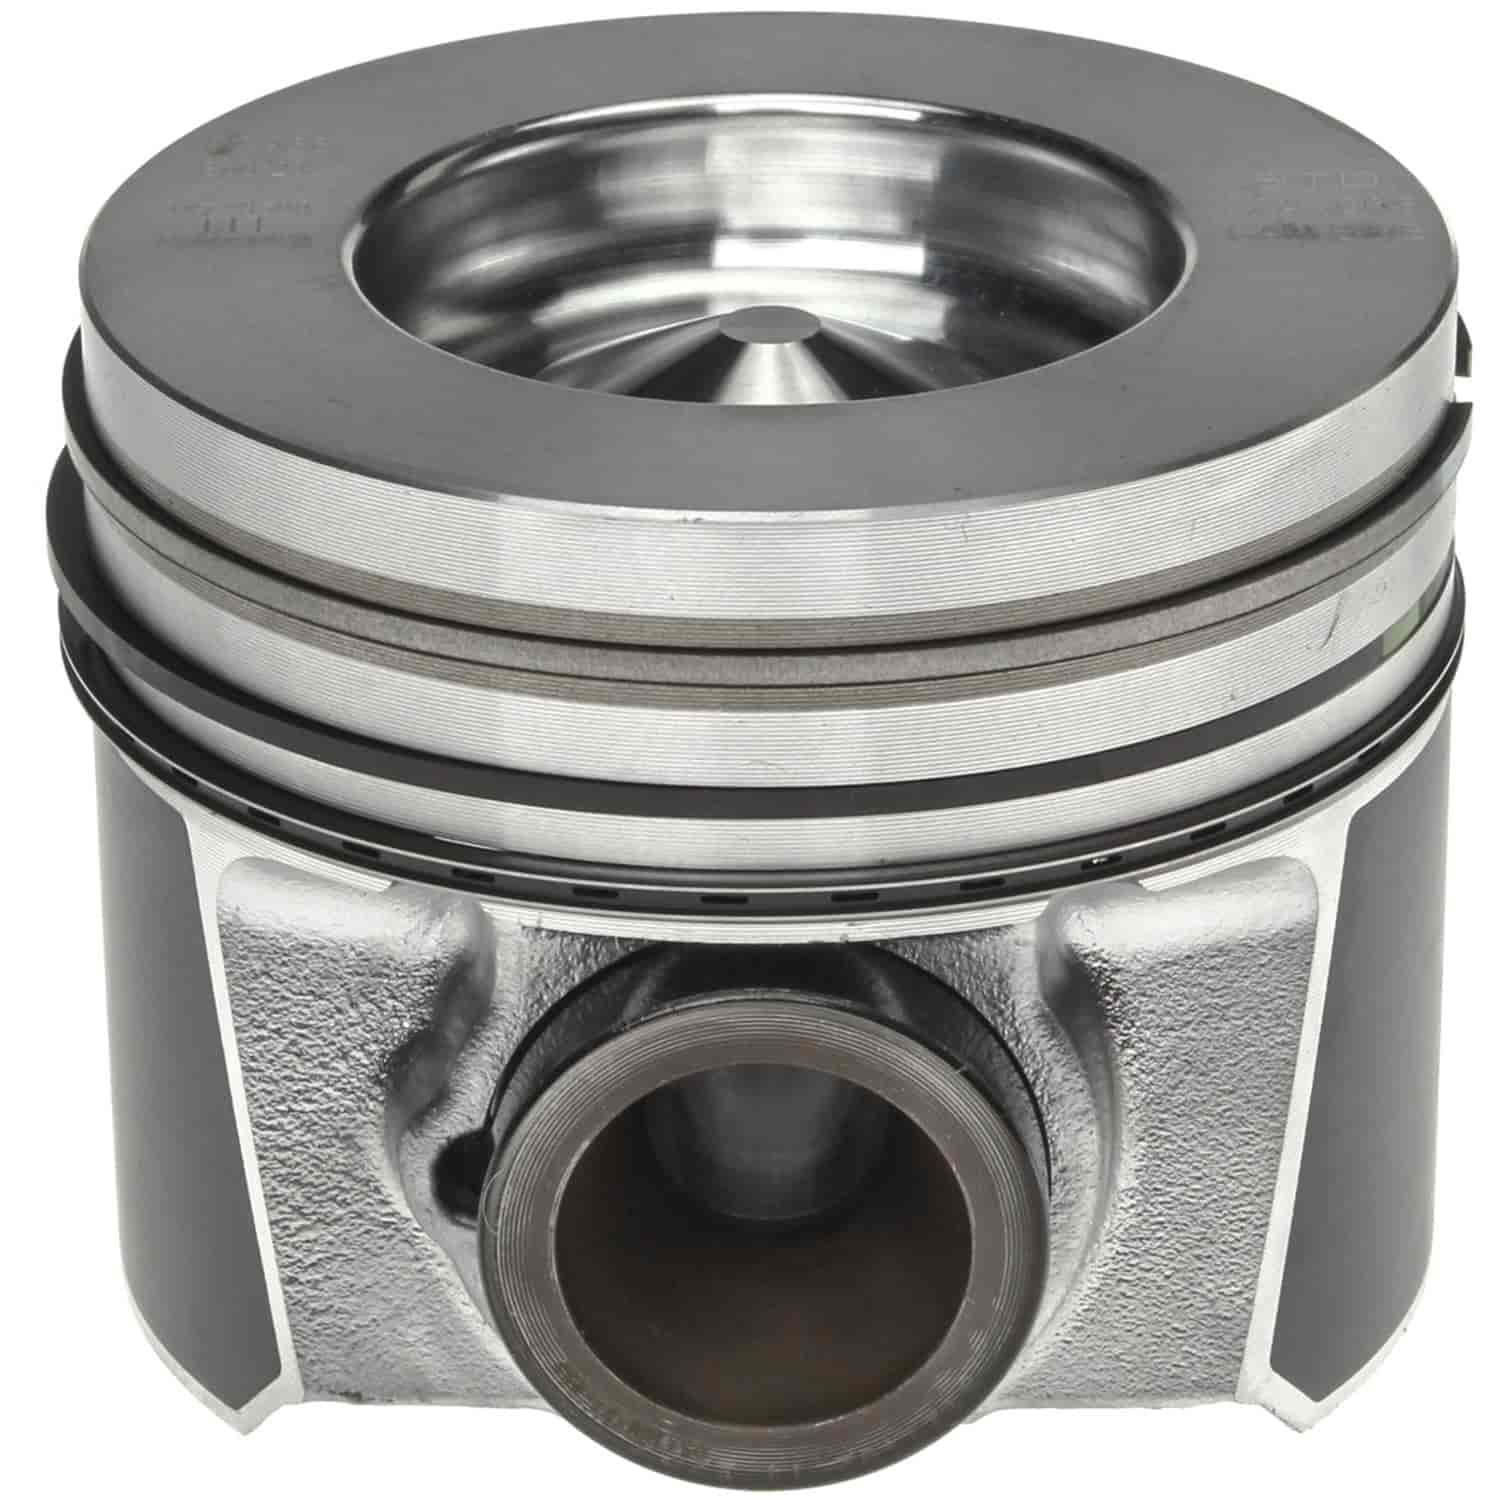 Piston and Rings Set 2008-2010 Ford/Navistar Powerstroke Diesel V8 6.4L with 3.876"/98.25mm Bore (+.25mm)